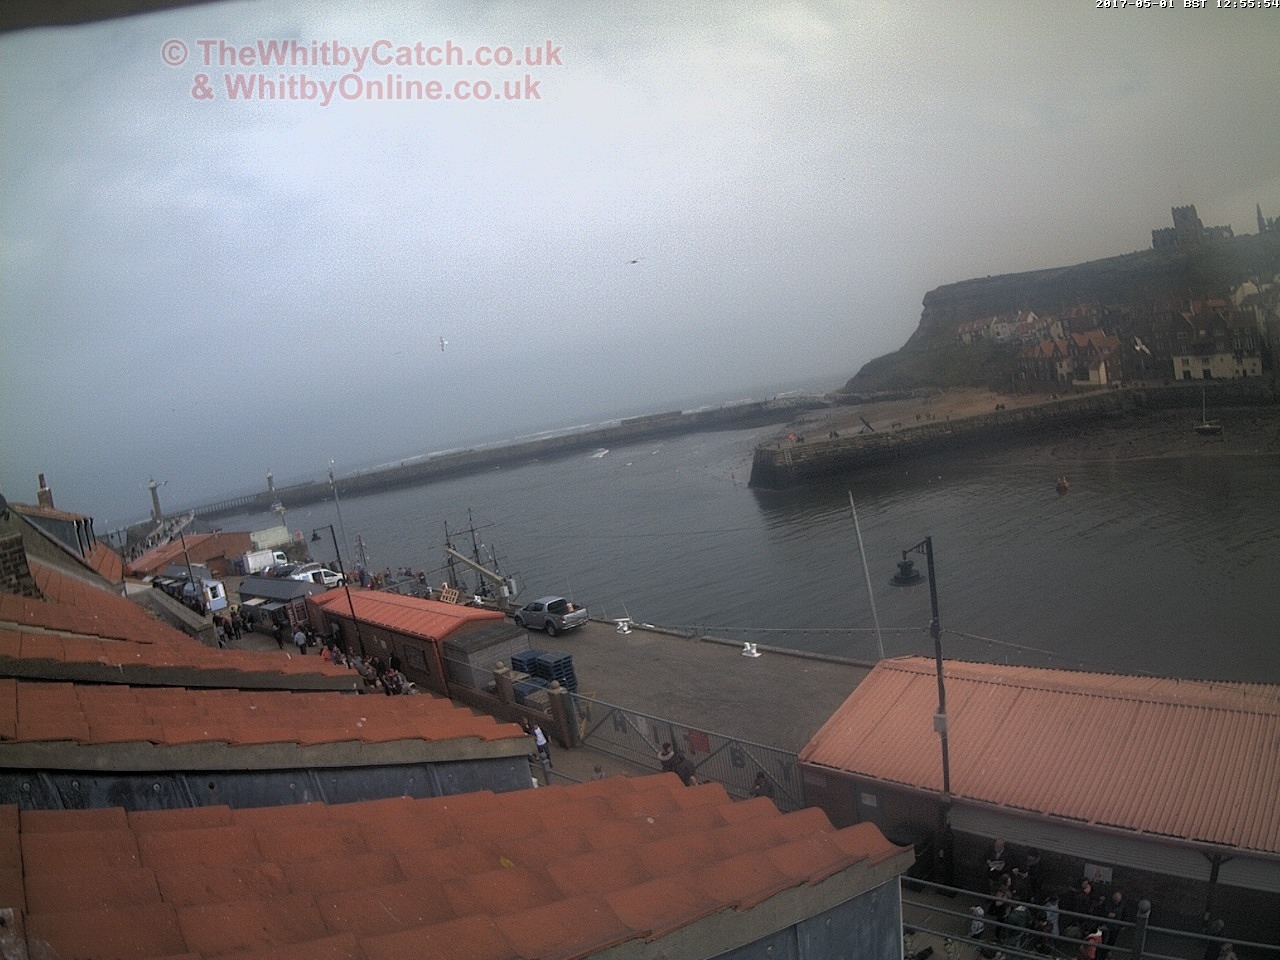 Whitby Mon 1st May 2017 12:56.